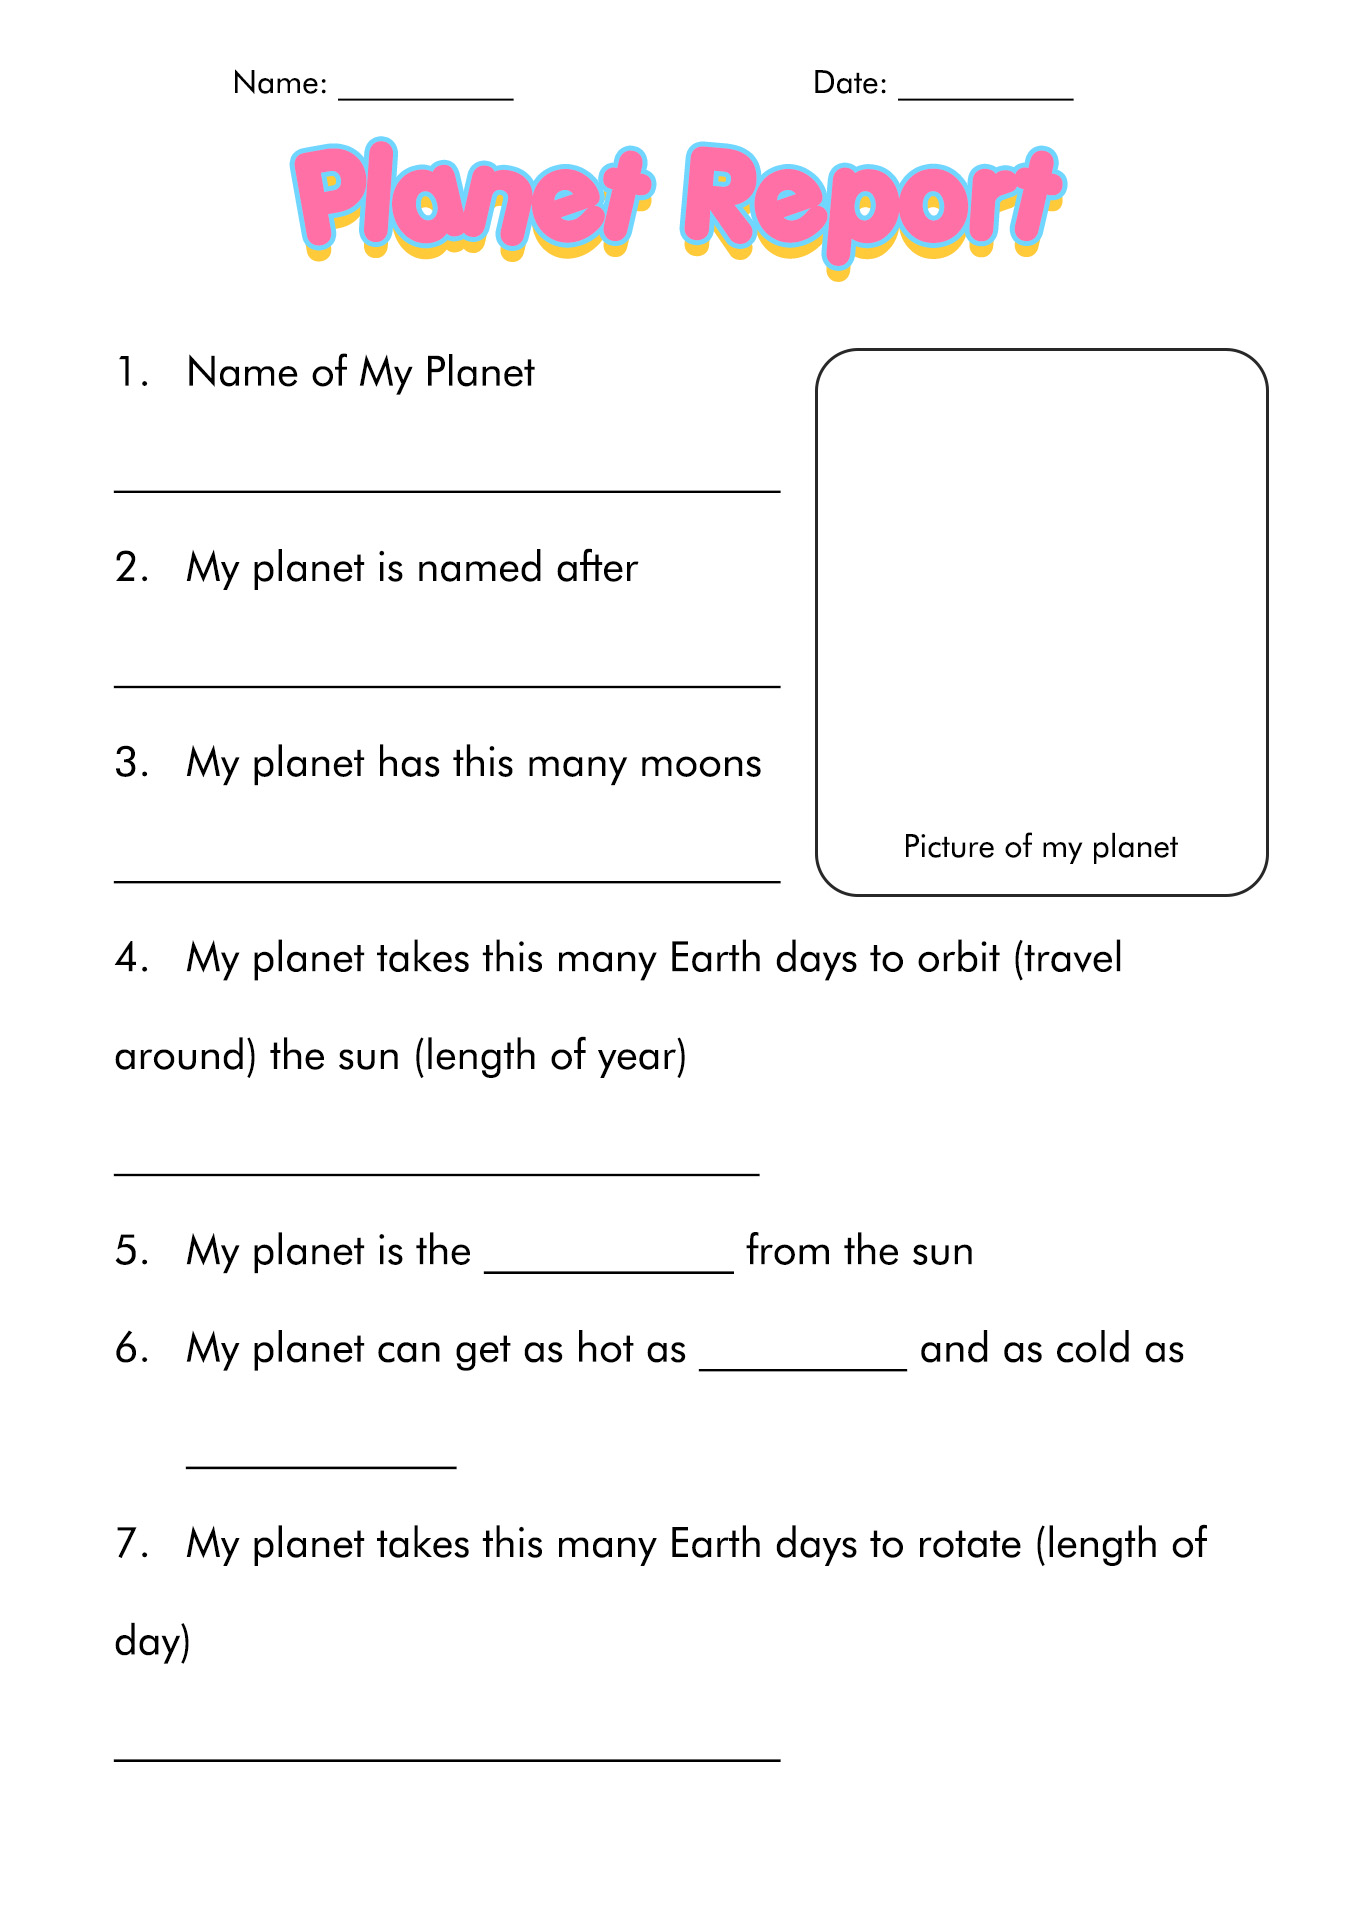 Free 7th Grade Science Worksheets Image